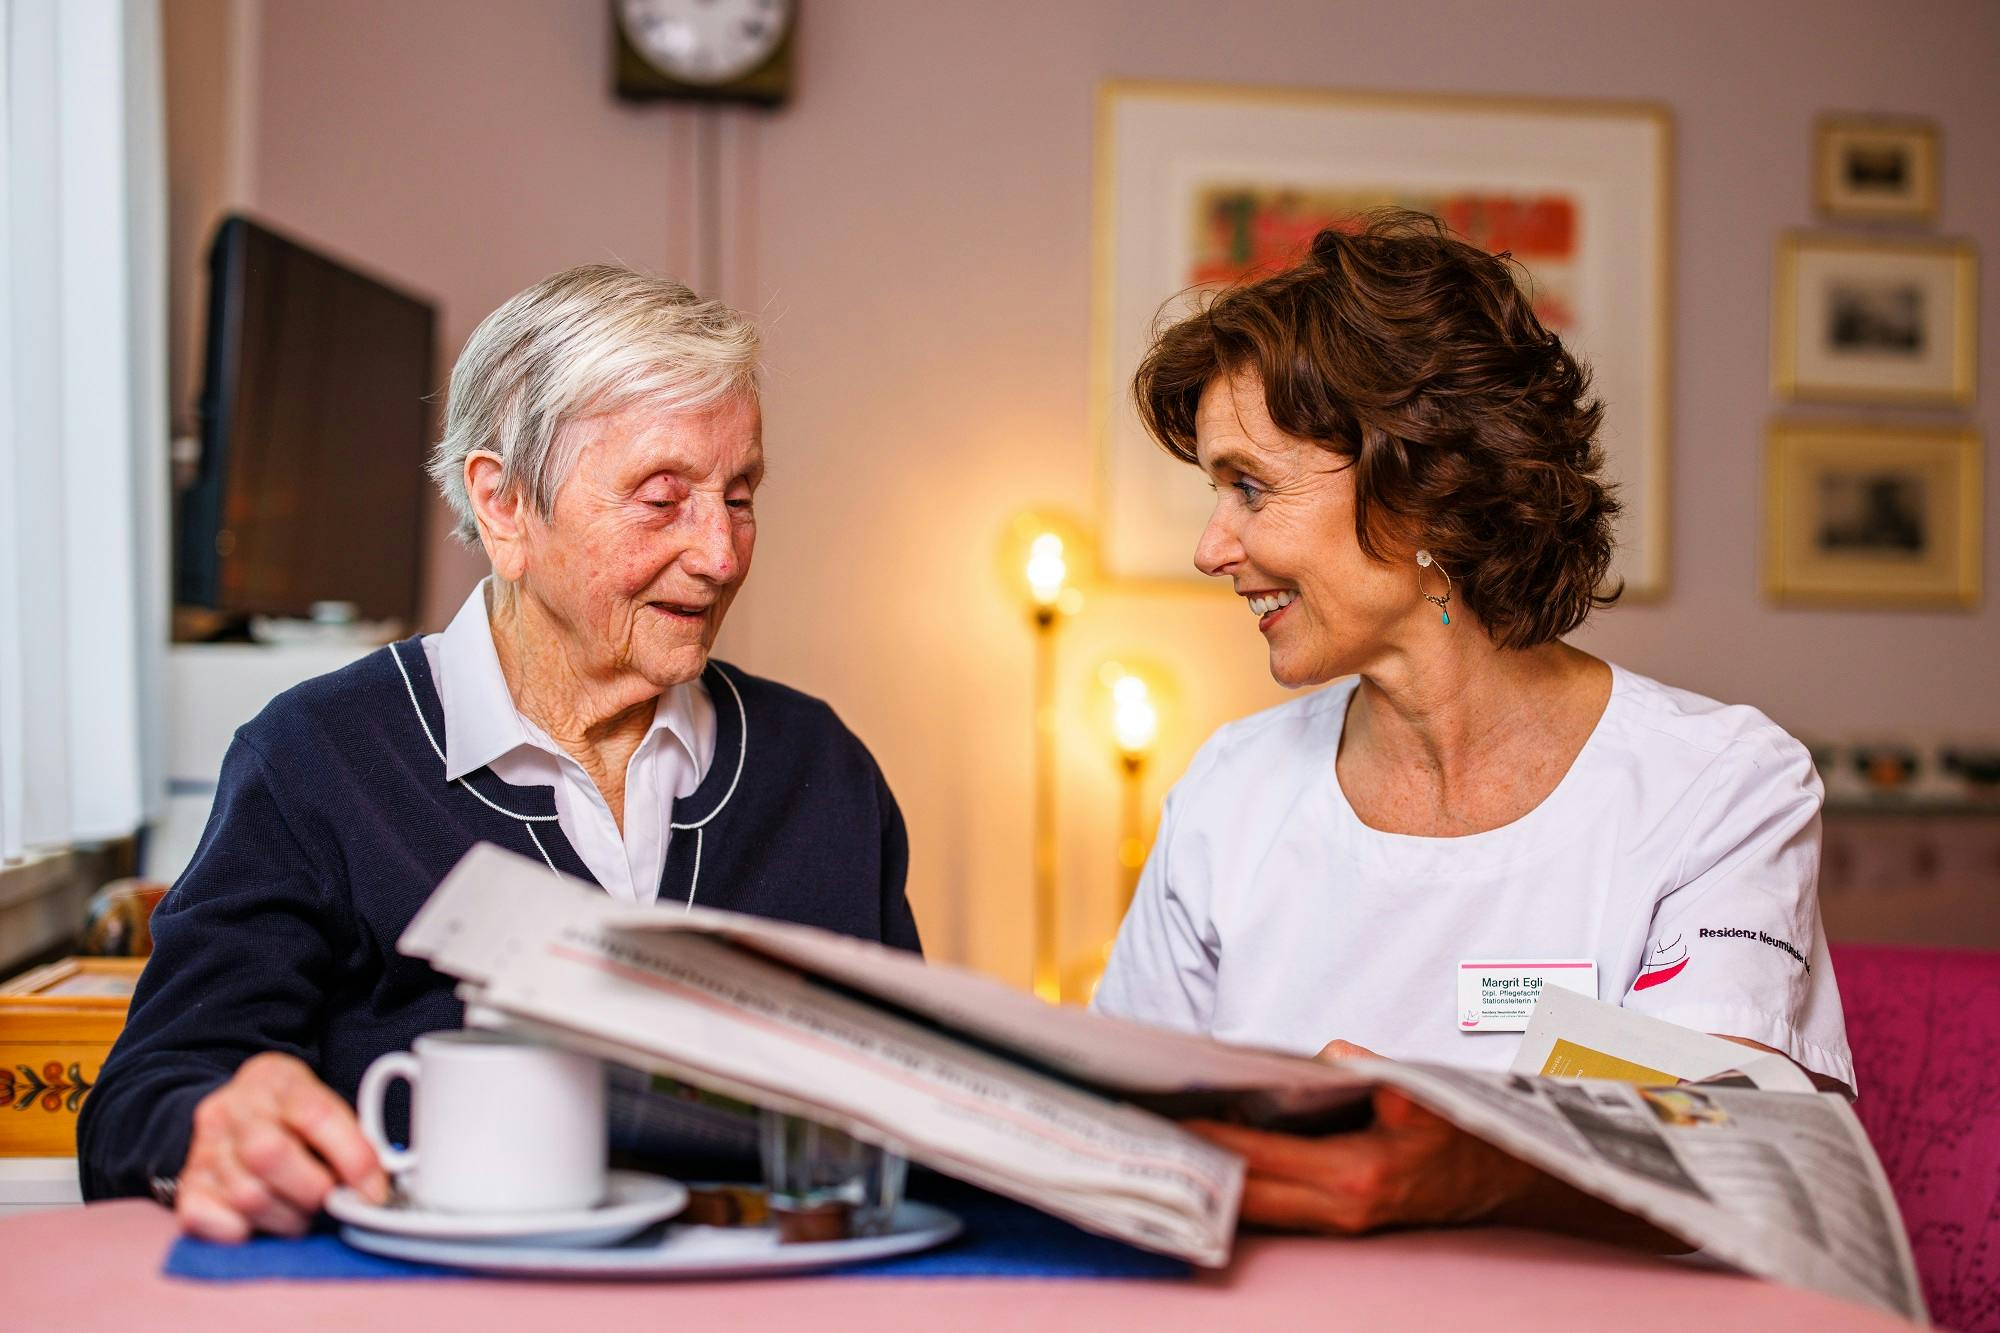 Elderly woman and carer smiling with a newspaper in a cosy room.